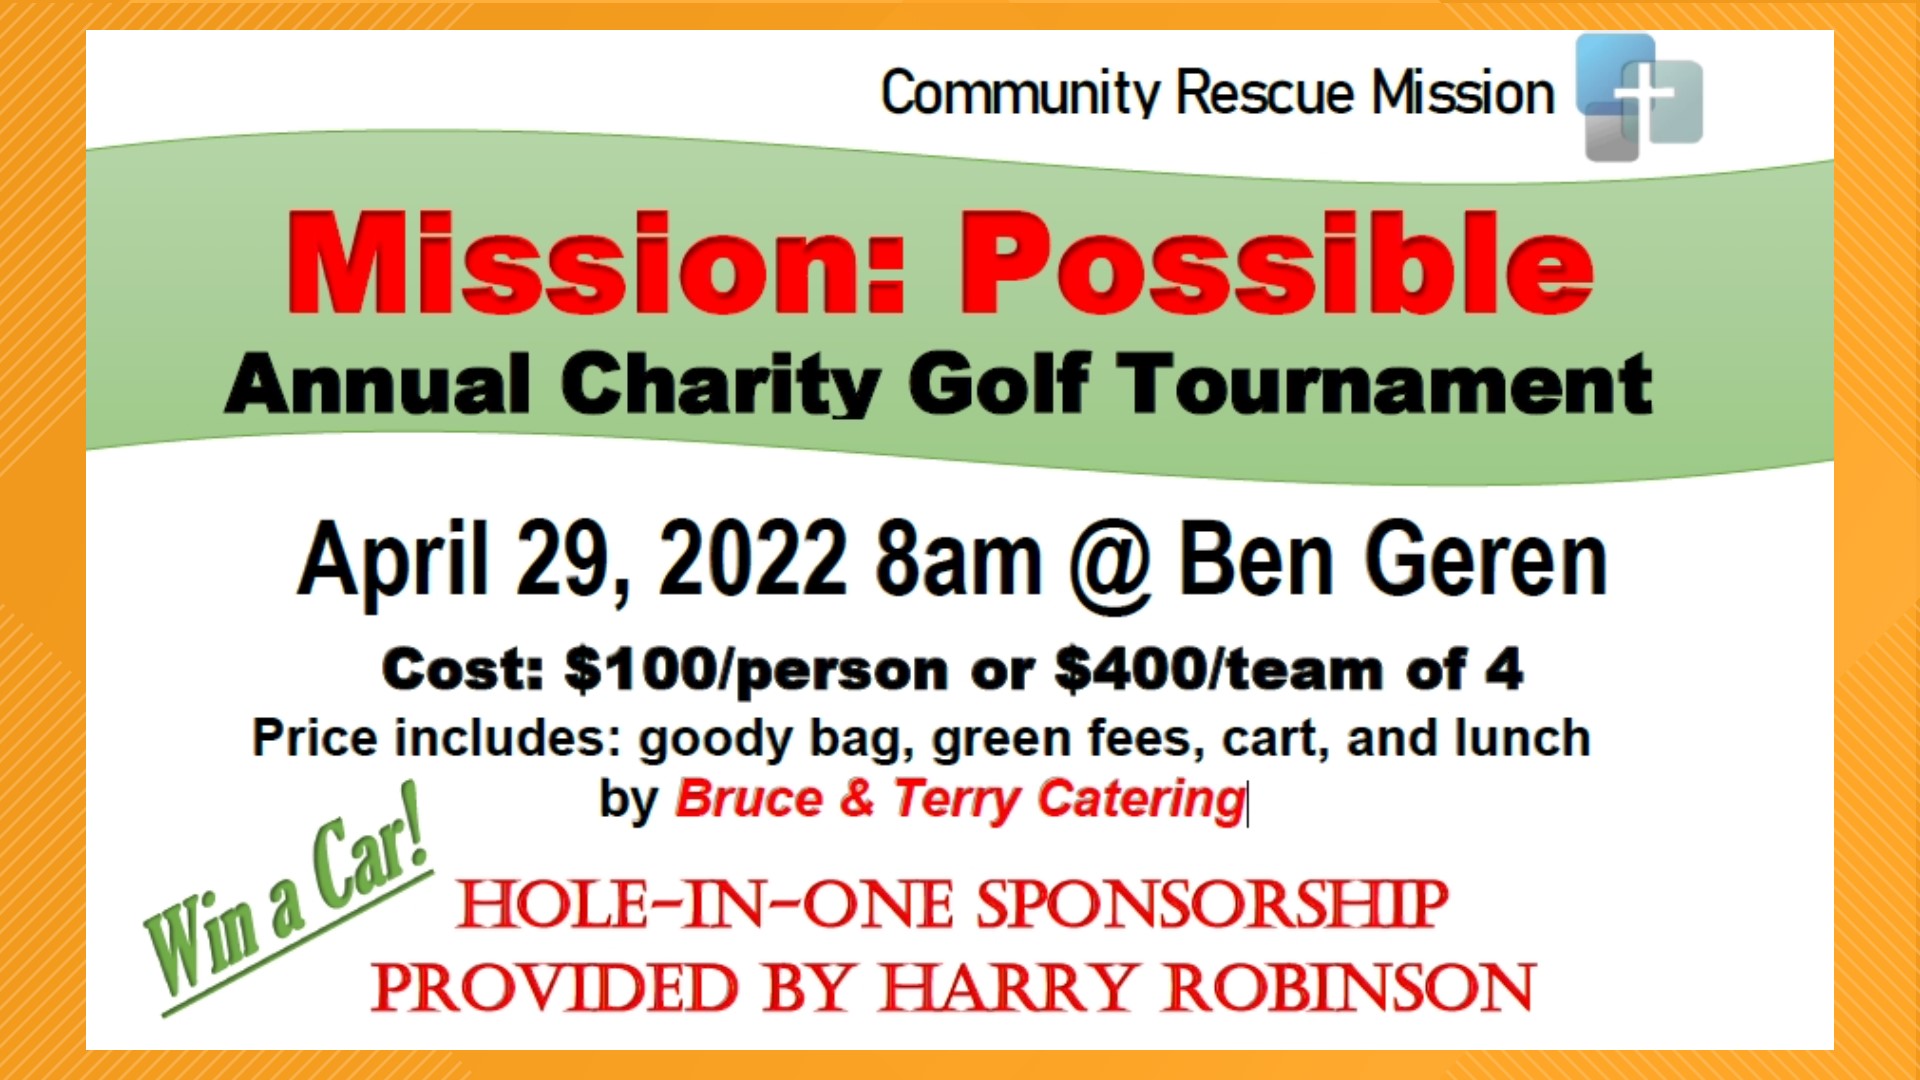 Daren spoke with Heather Sanders and Mike Thames from the Community Rescue Mission in Fort Smith about the golf tournament on April 29.